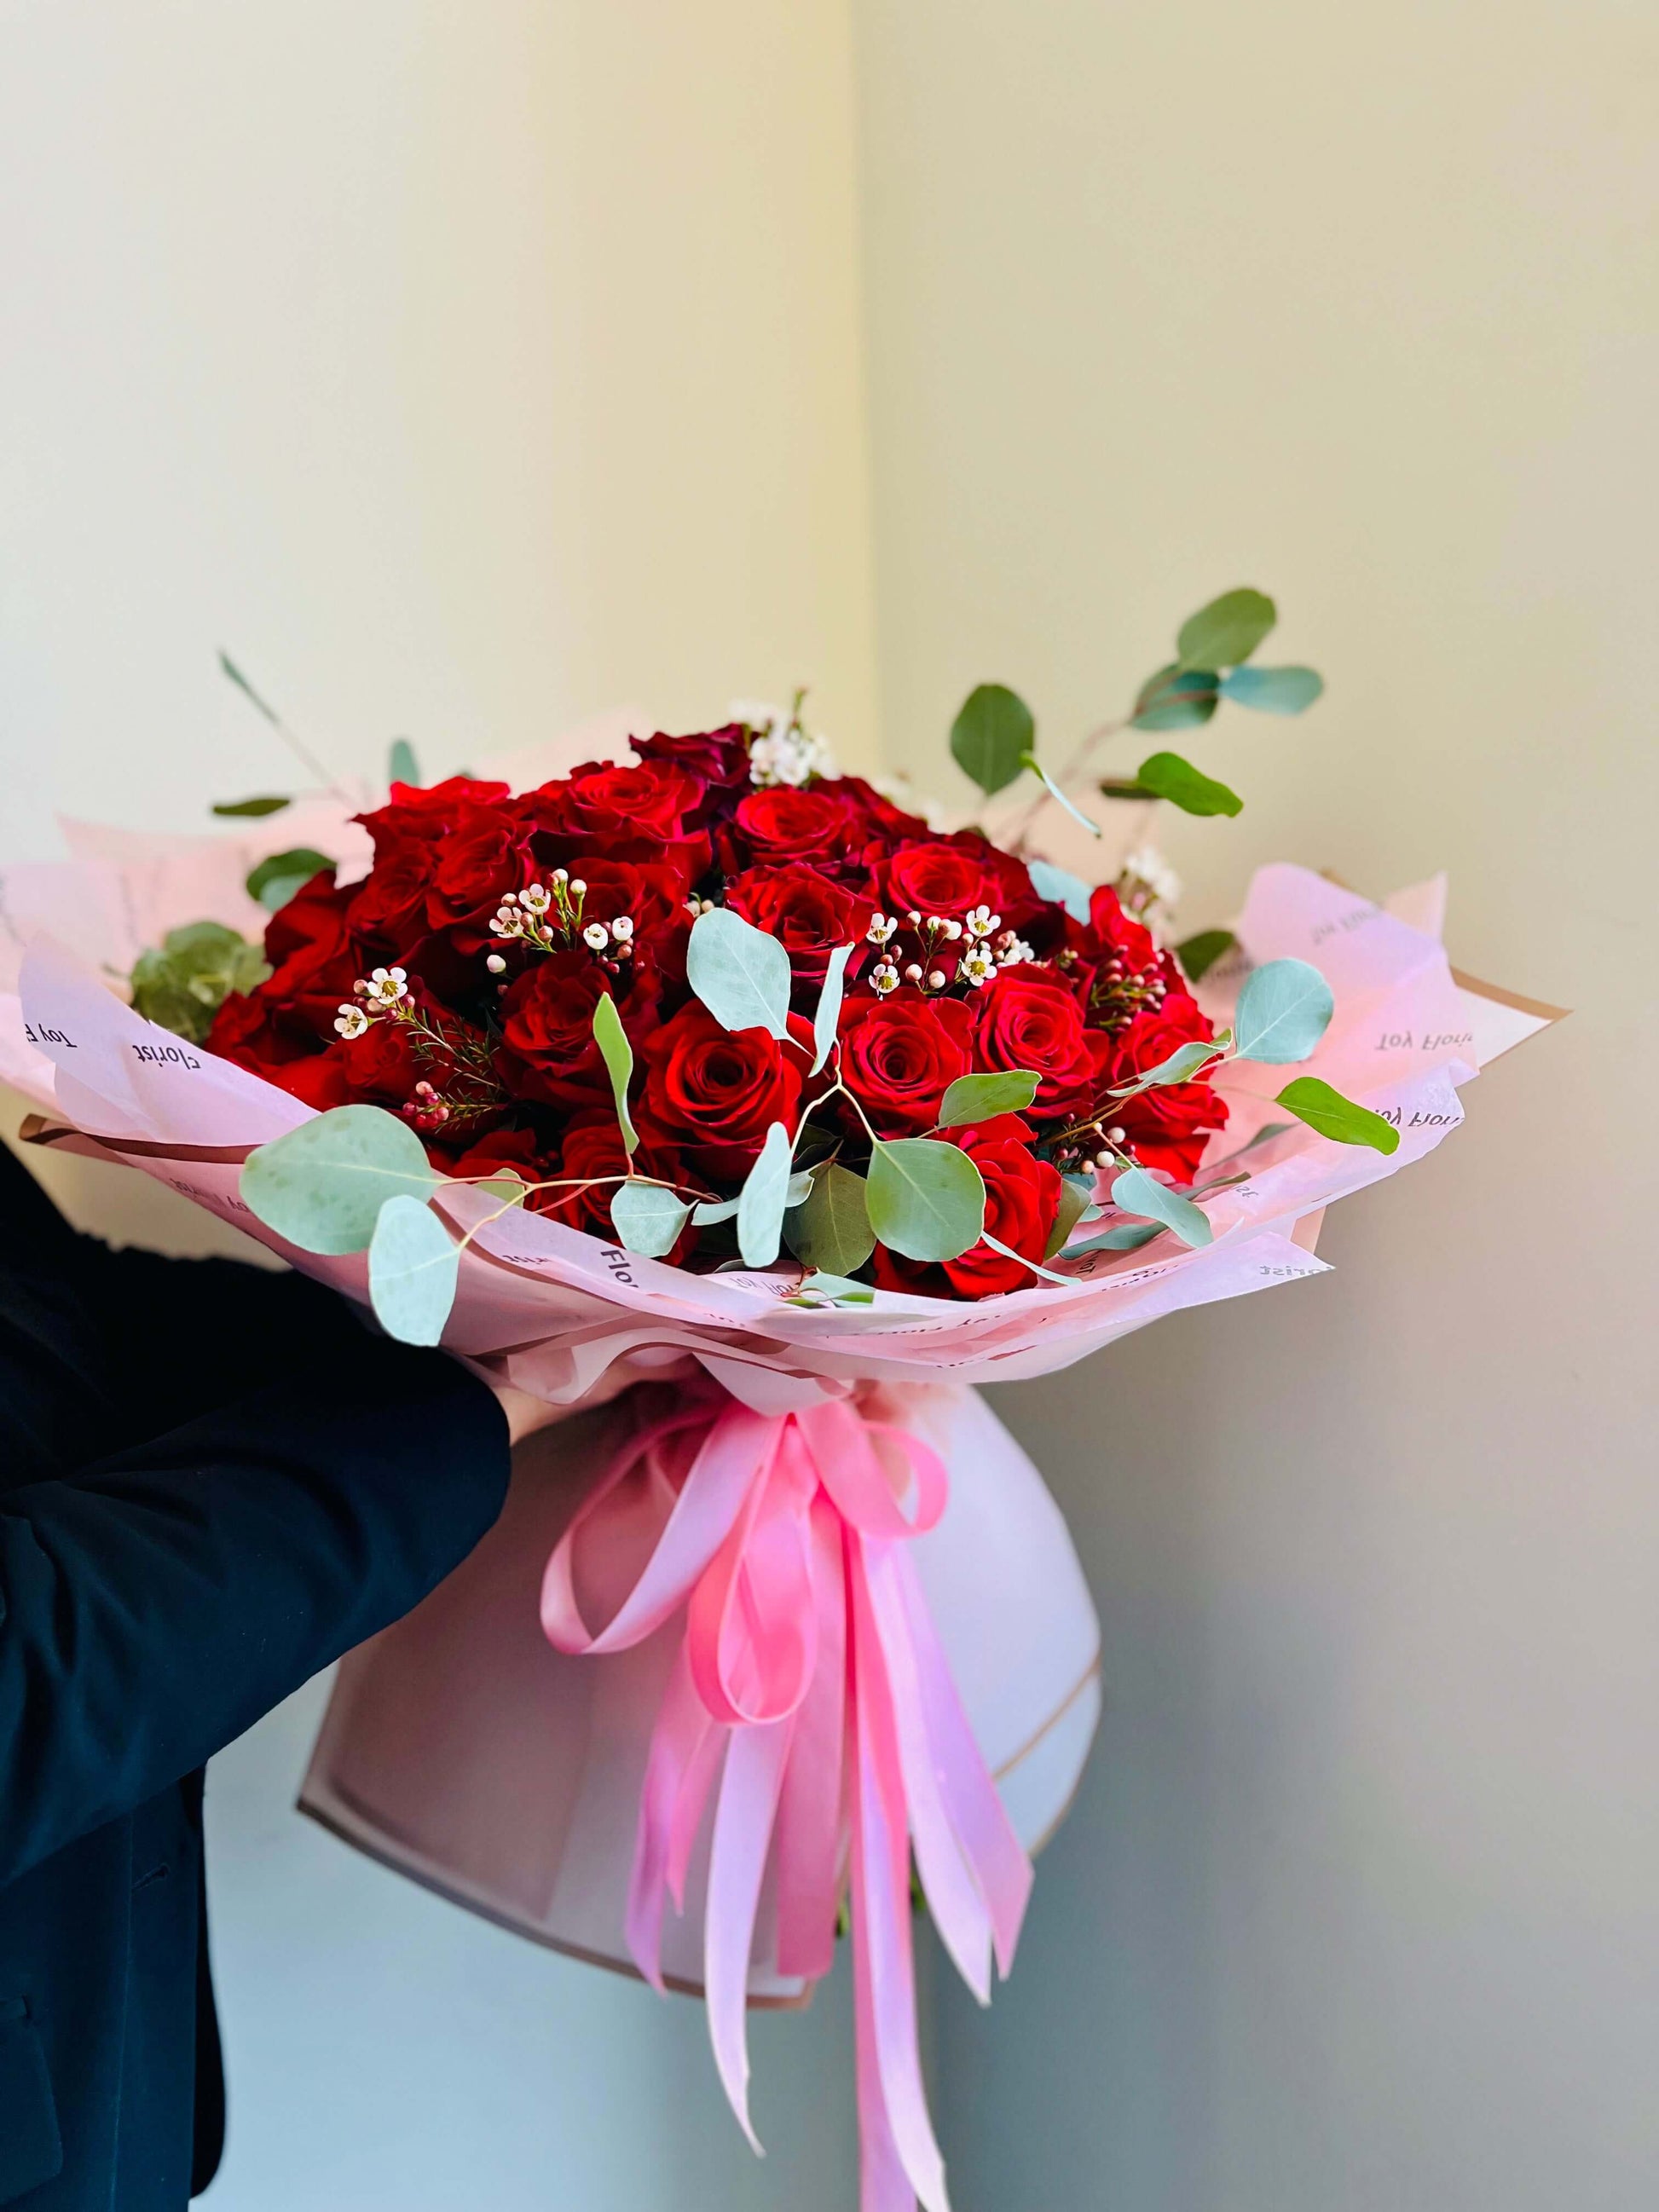 50 Red Roses Bouquet - Toy Florist